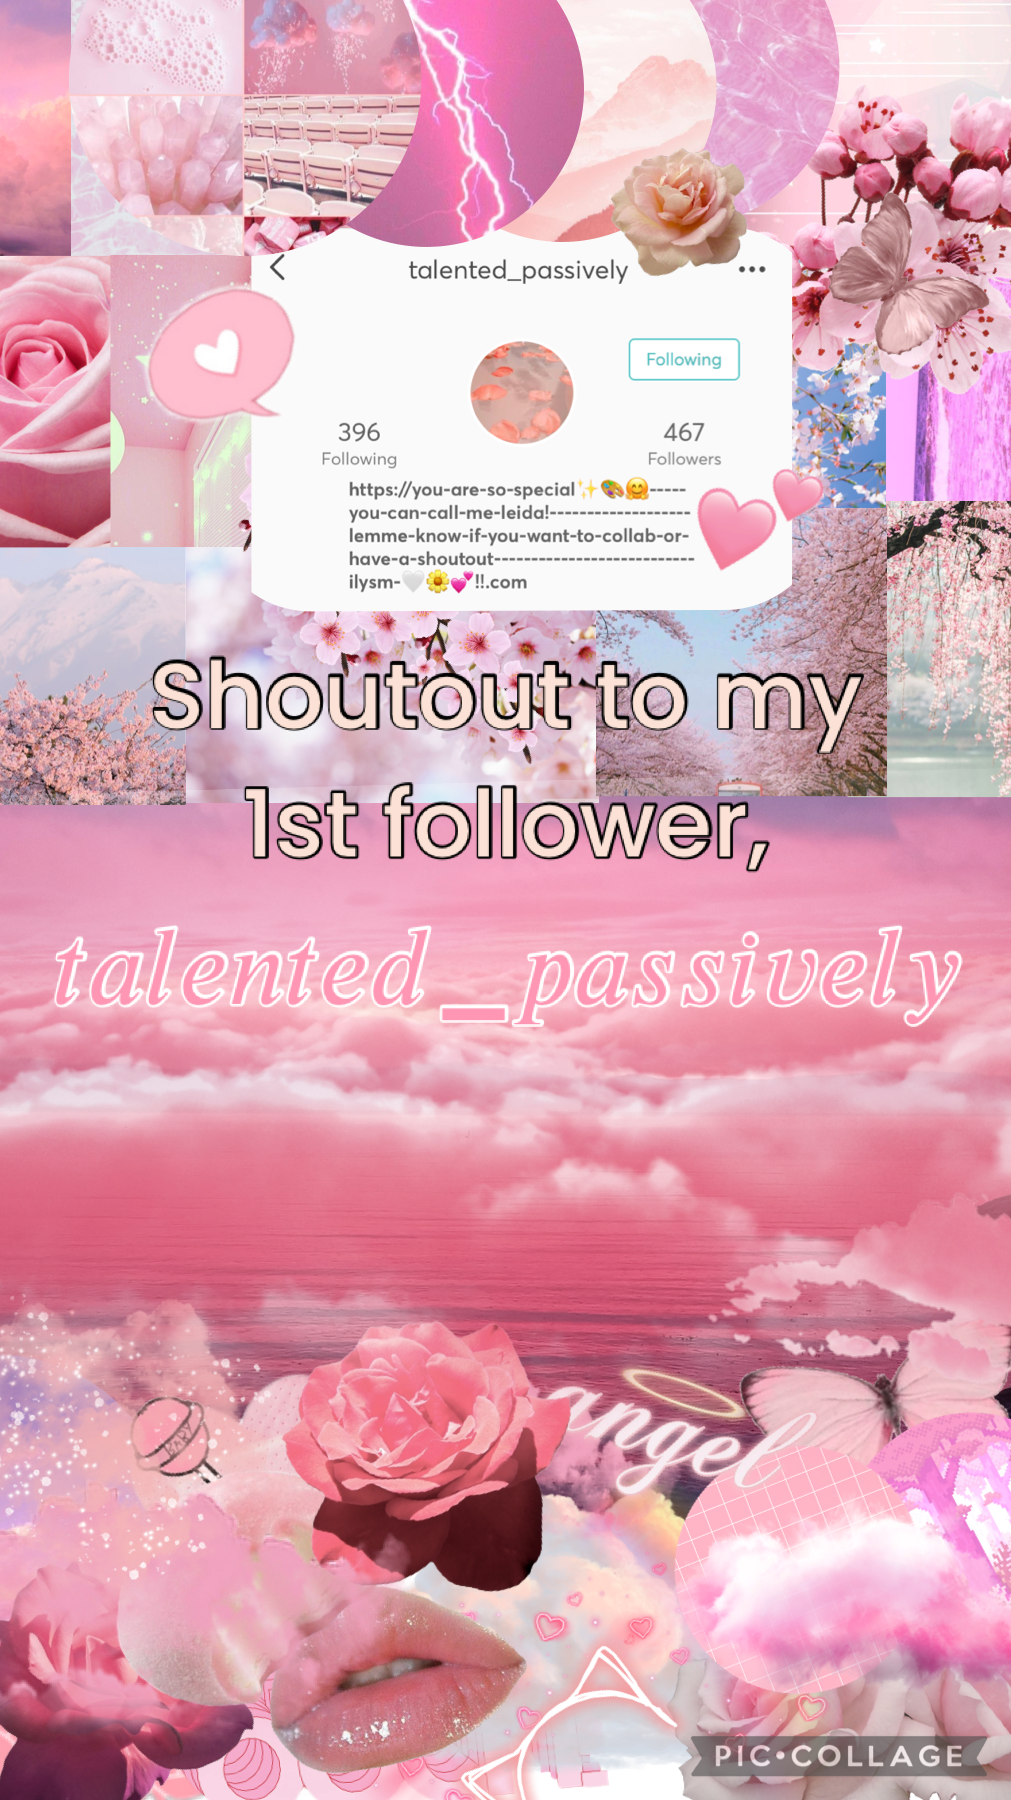 🌸𝑇𝑎𝑝💖

(Part one) I just wanna give a shoutout to my first EVER FOLLOWER, talented_passively, who was there from the beginning until I climbed to 70! Thank you to everyone who is supporting me, it means a lot!